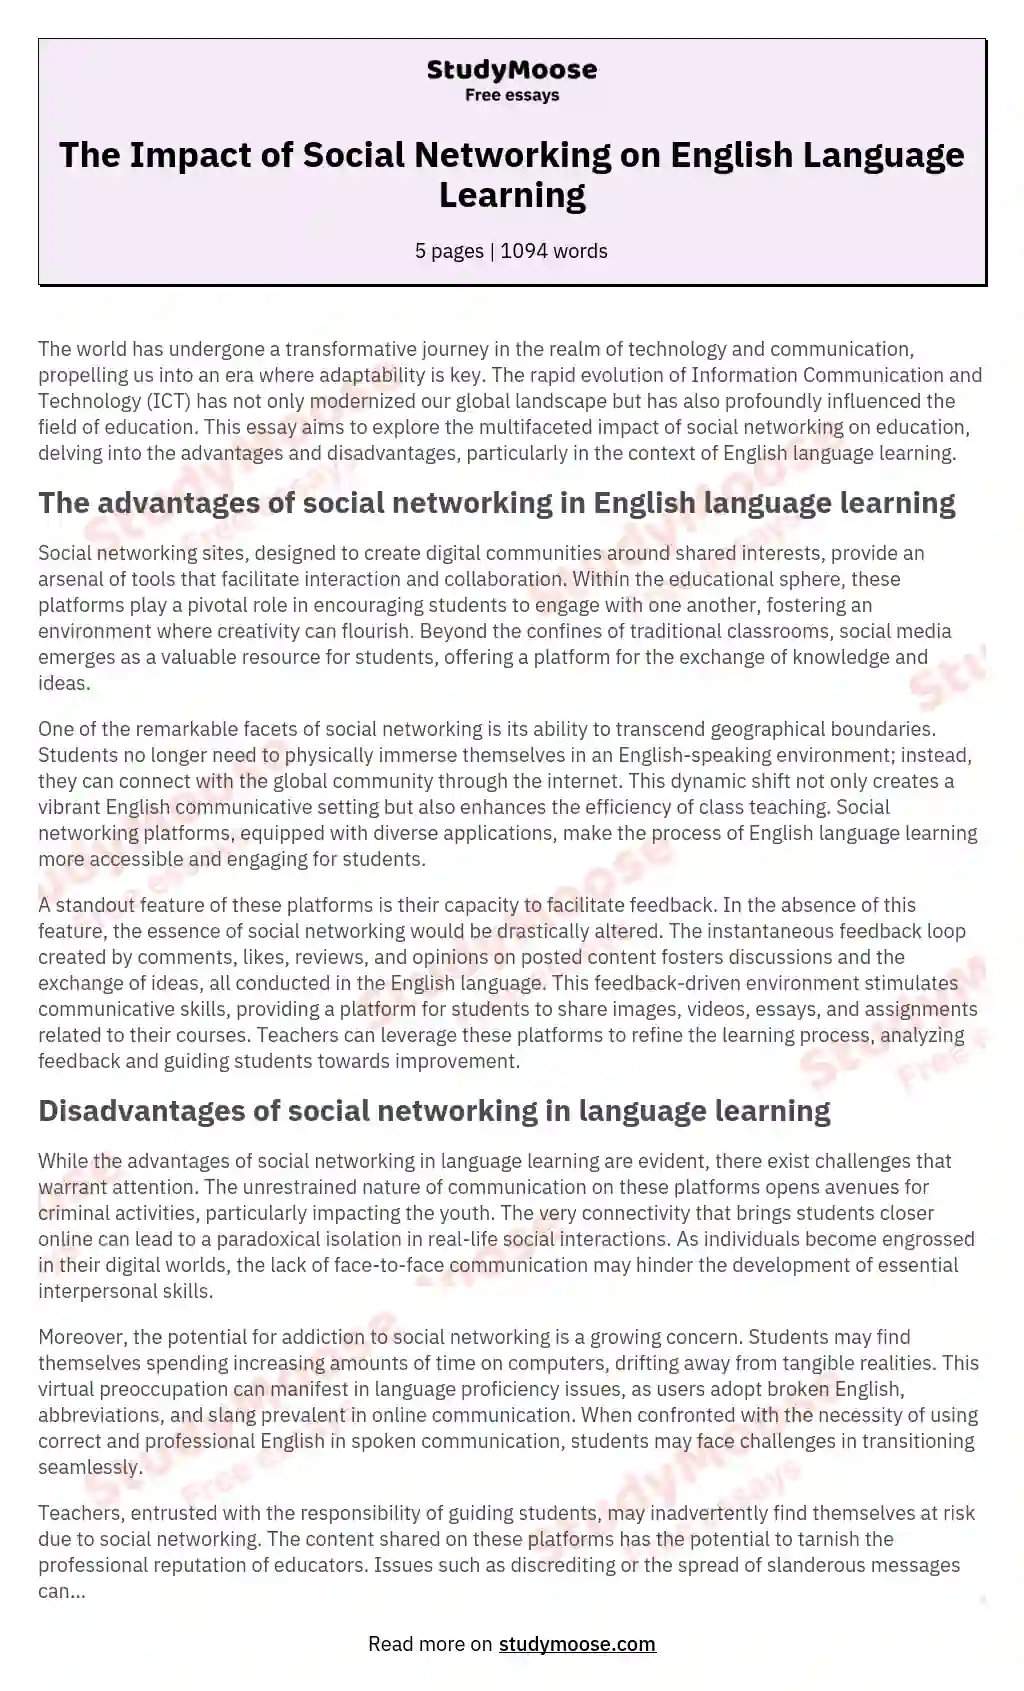 The Impact of Social Networking on English Language Learning essay